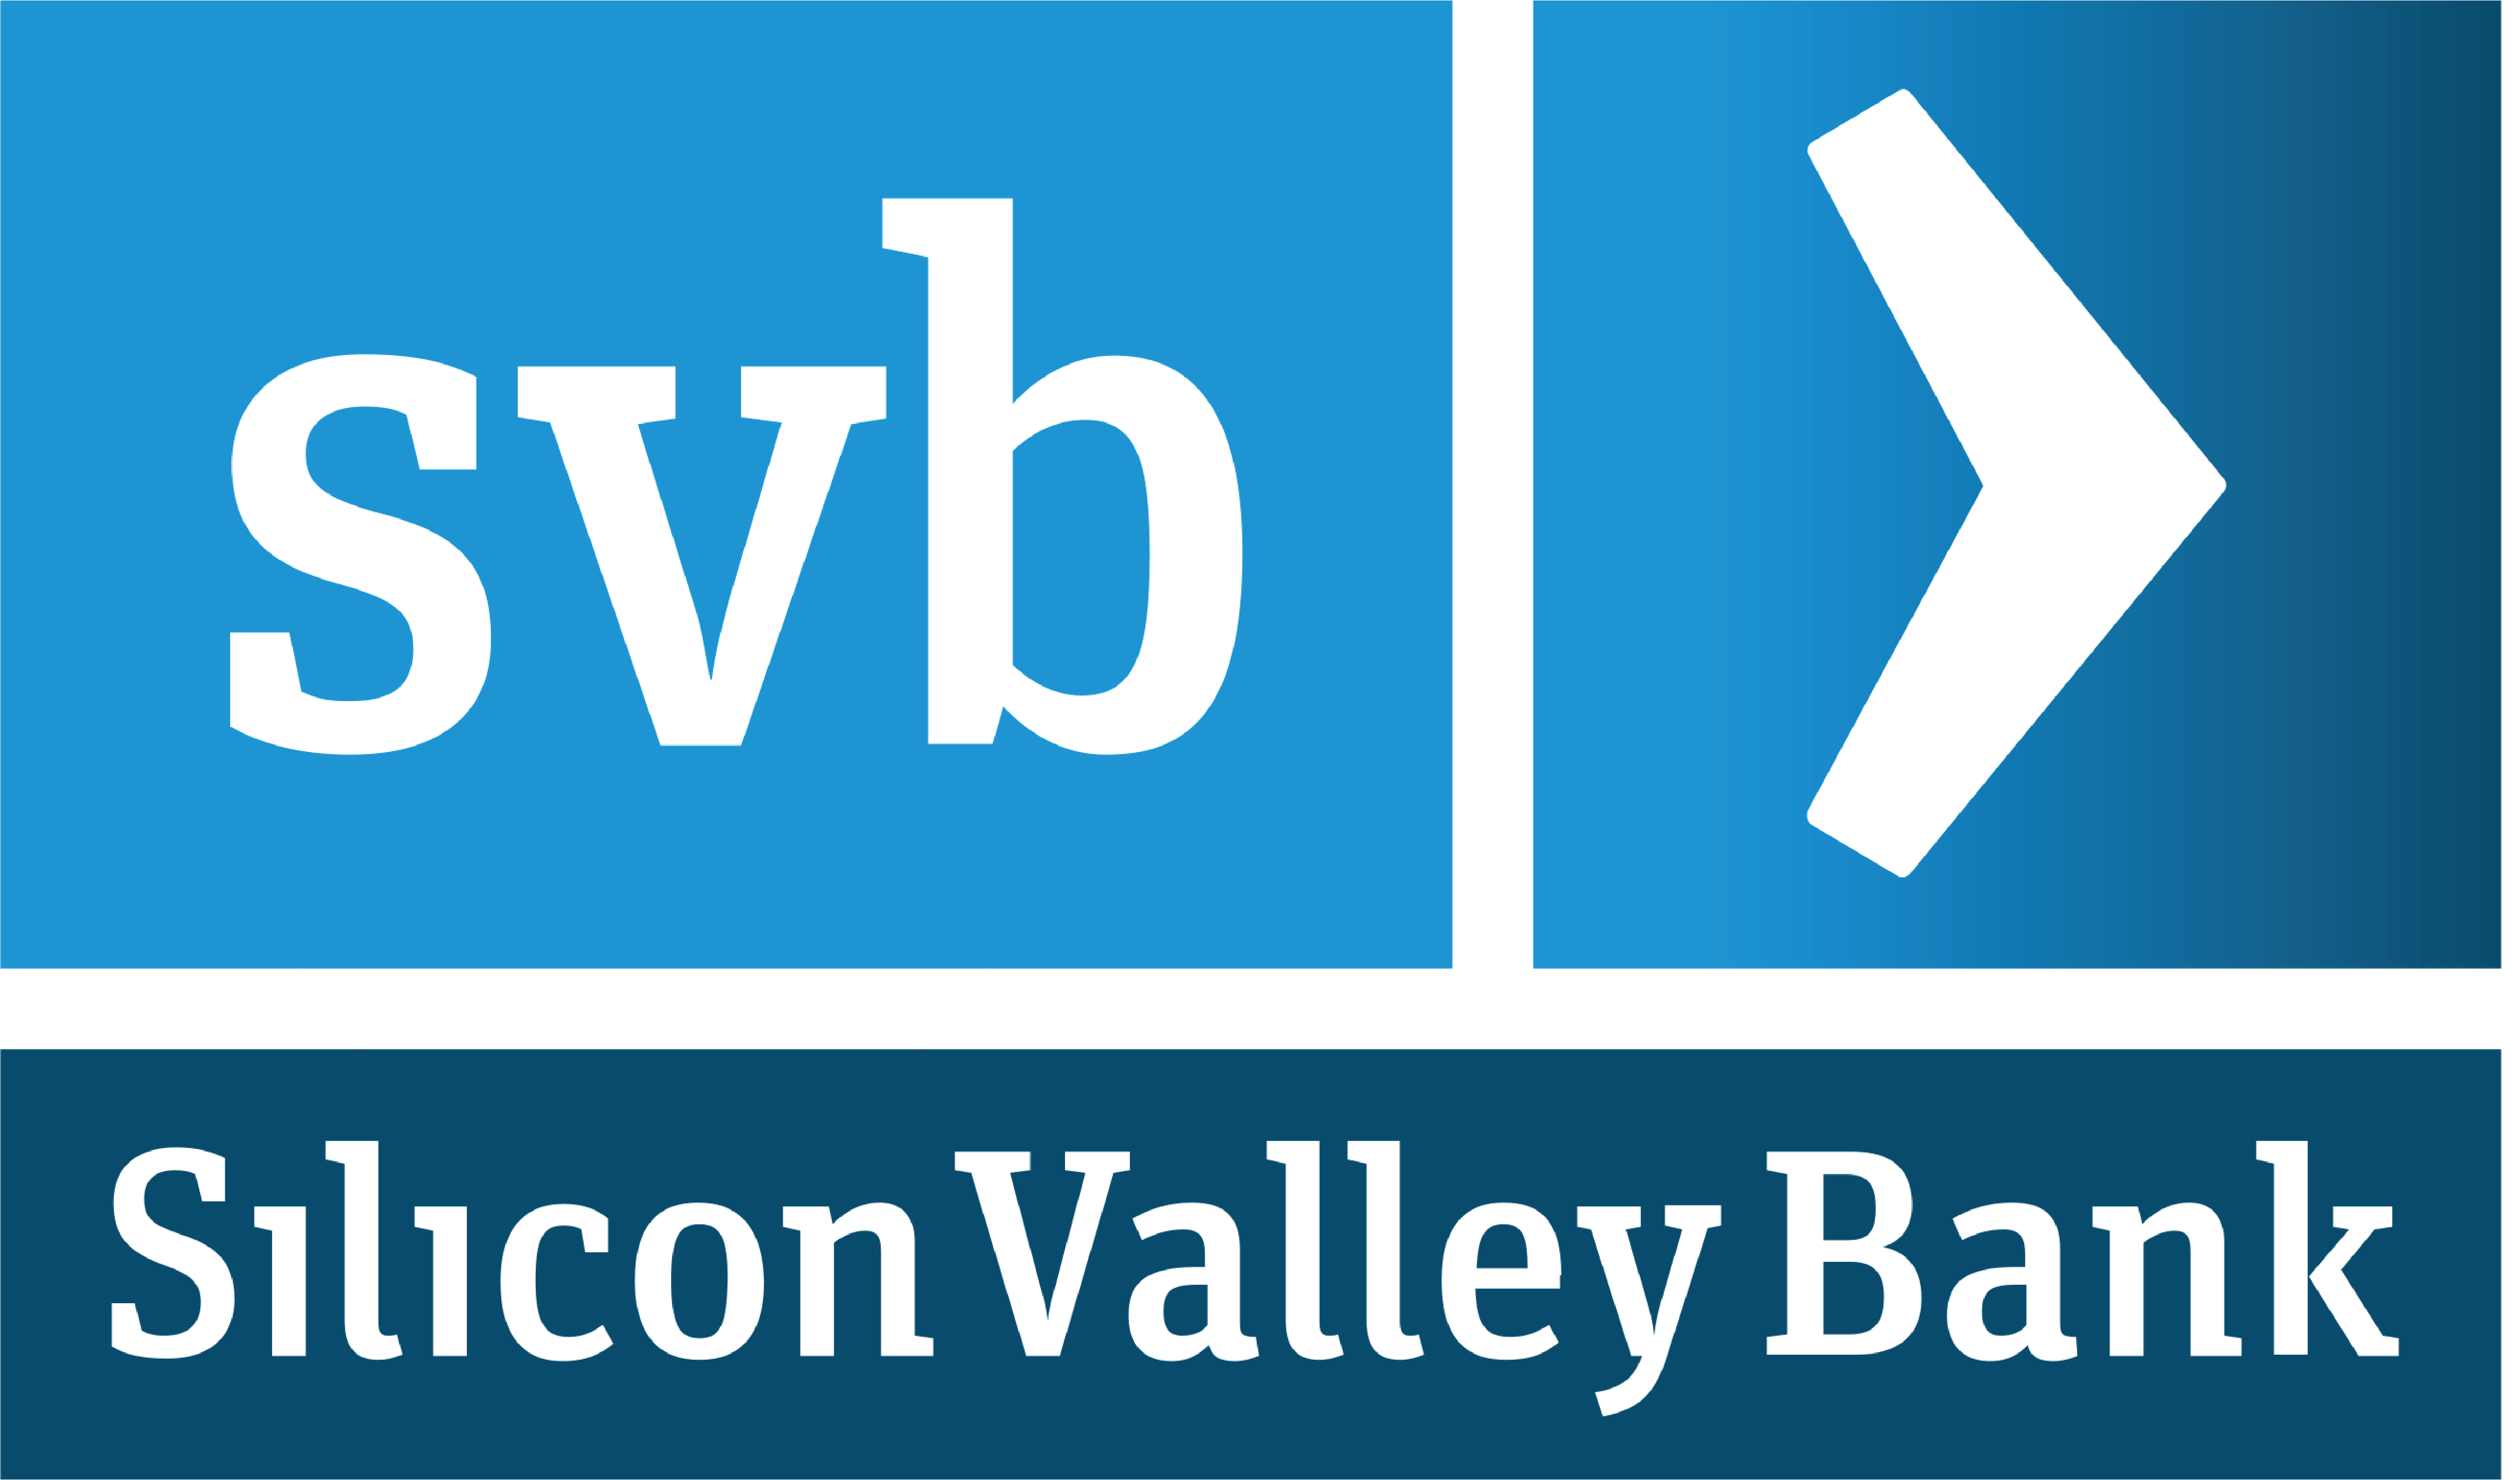 What is the status of Silicon Valley Bank (SVB)?